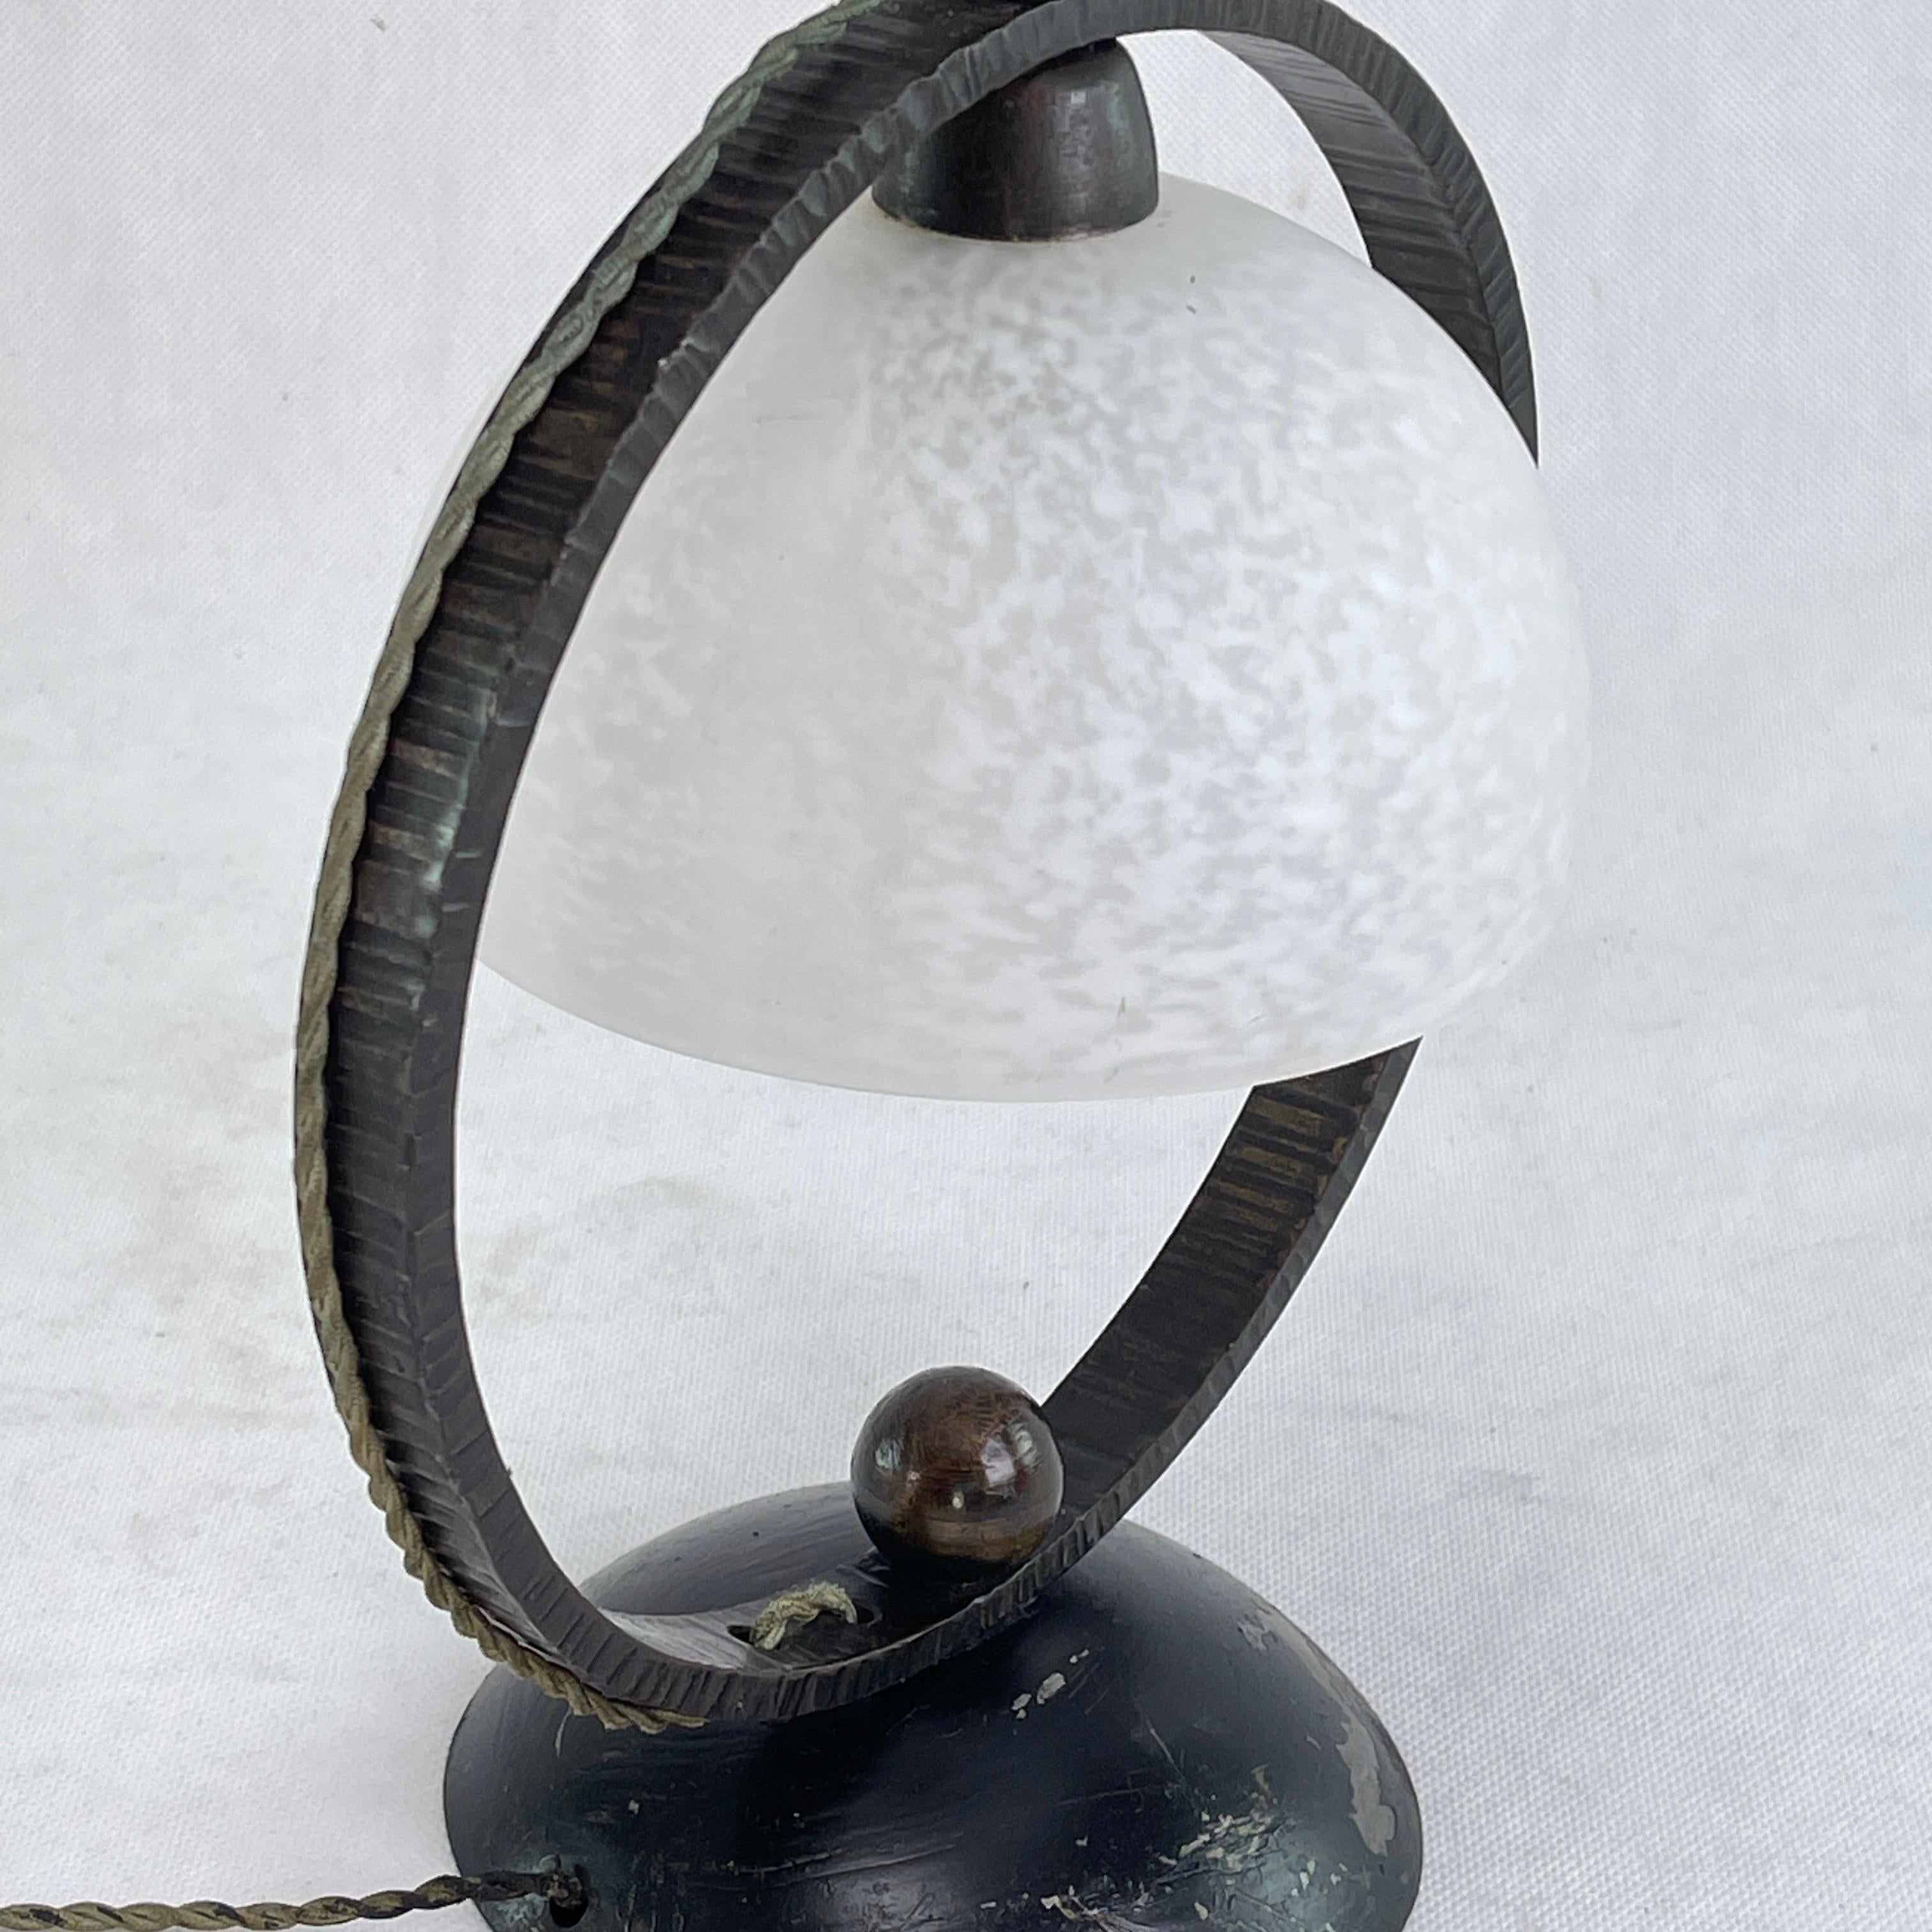 Art Deco desk lamp by Schneider - 1930s.

This beautiful reading lamp / bedside lamp from the 20s / 30s of the last century comes from France. The Pate de Verre glass shade signed 